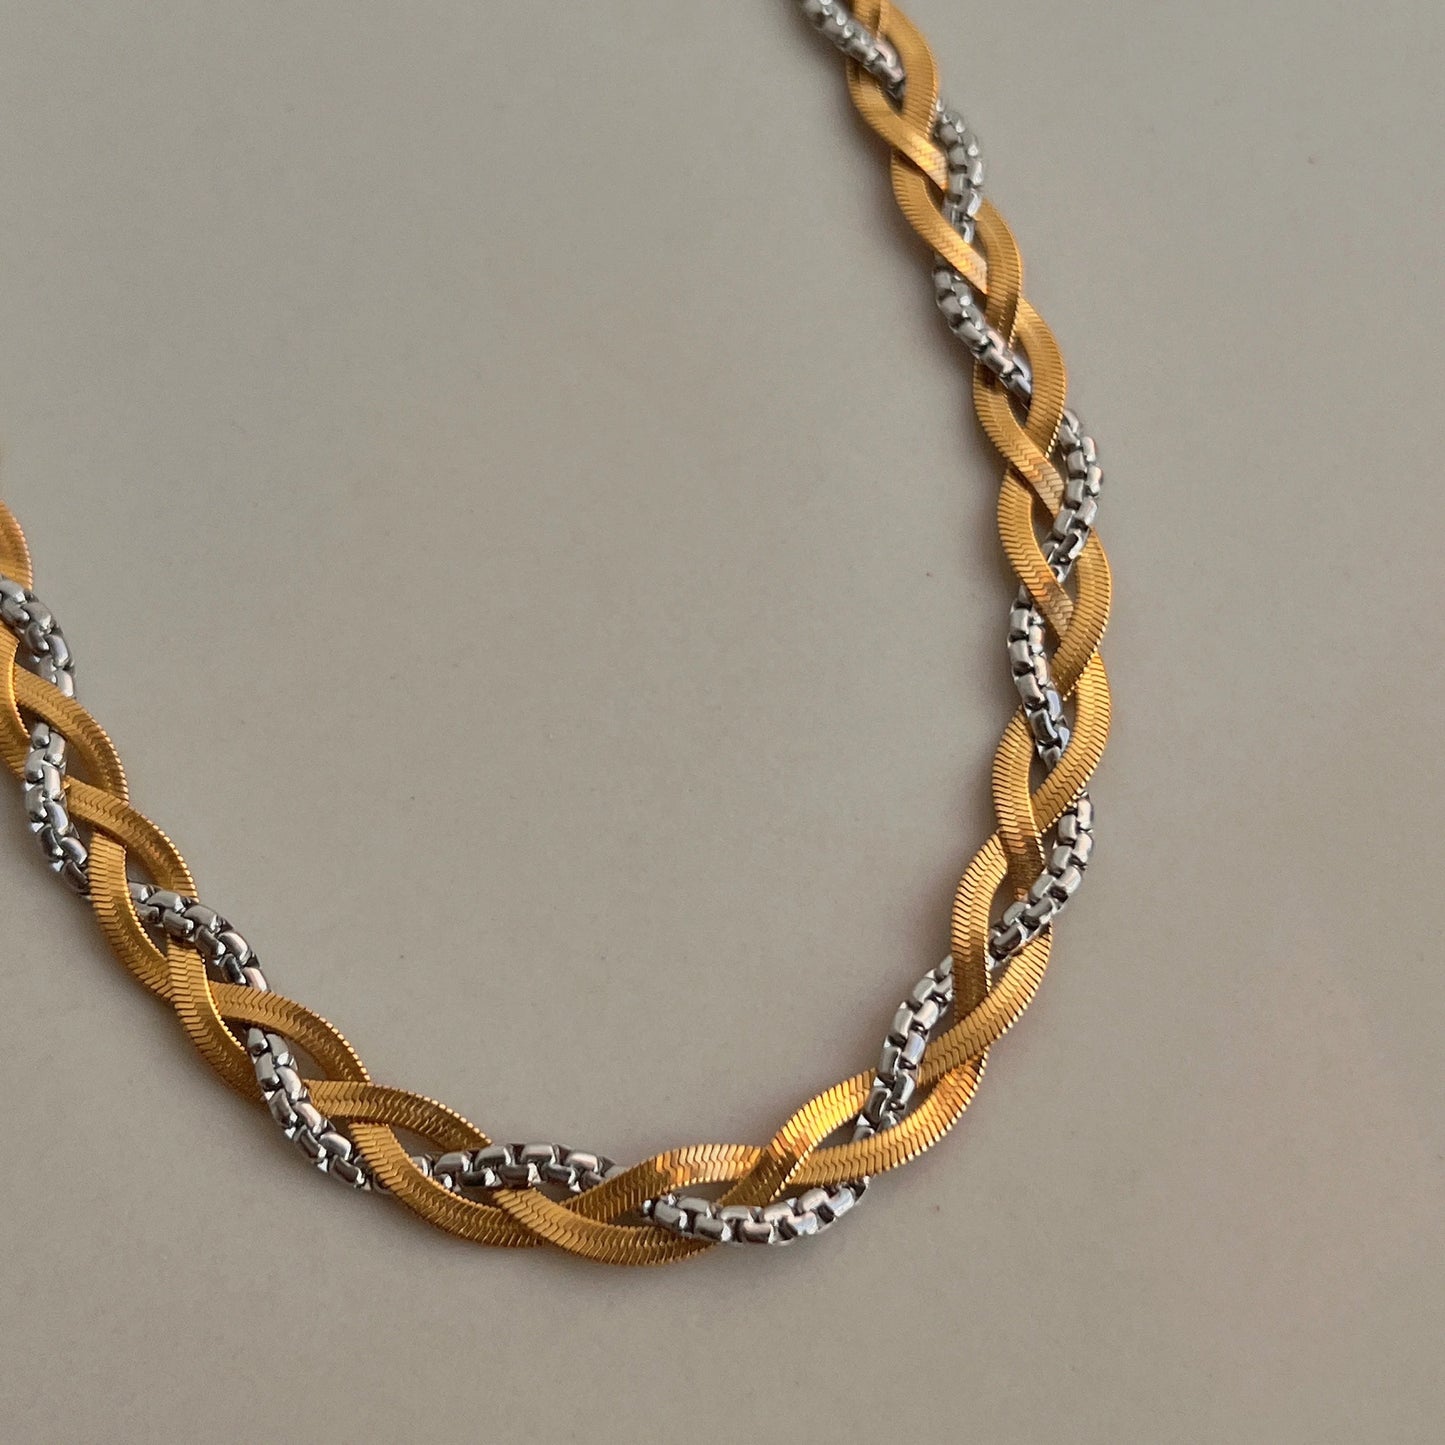 Tether Braided Necklace